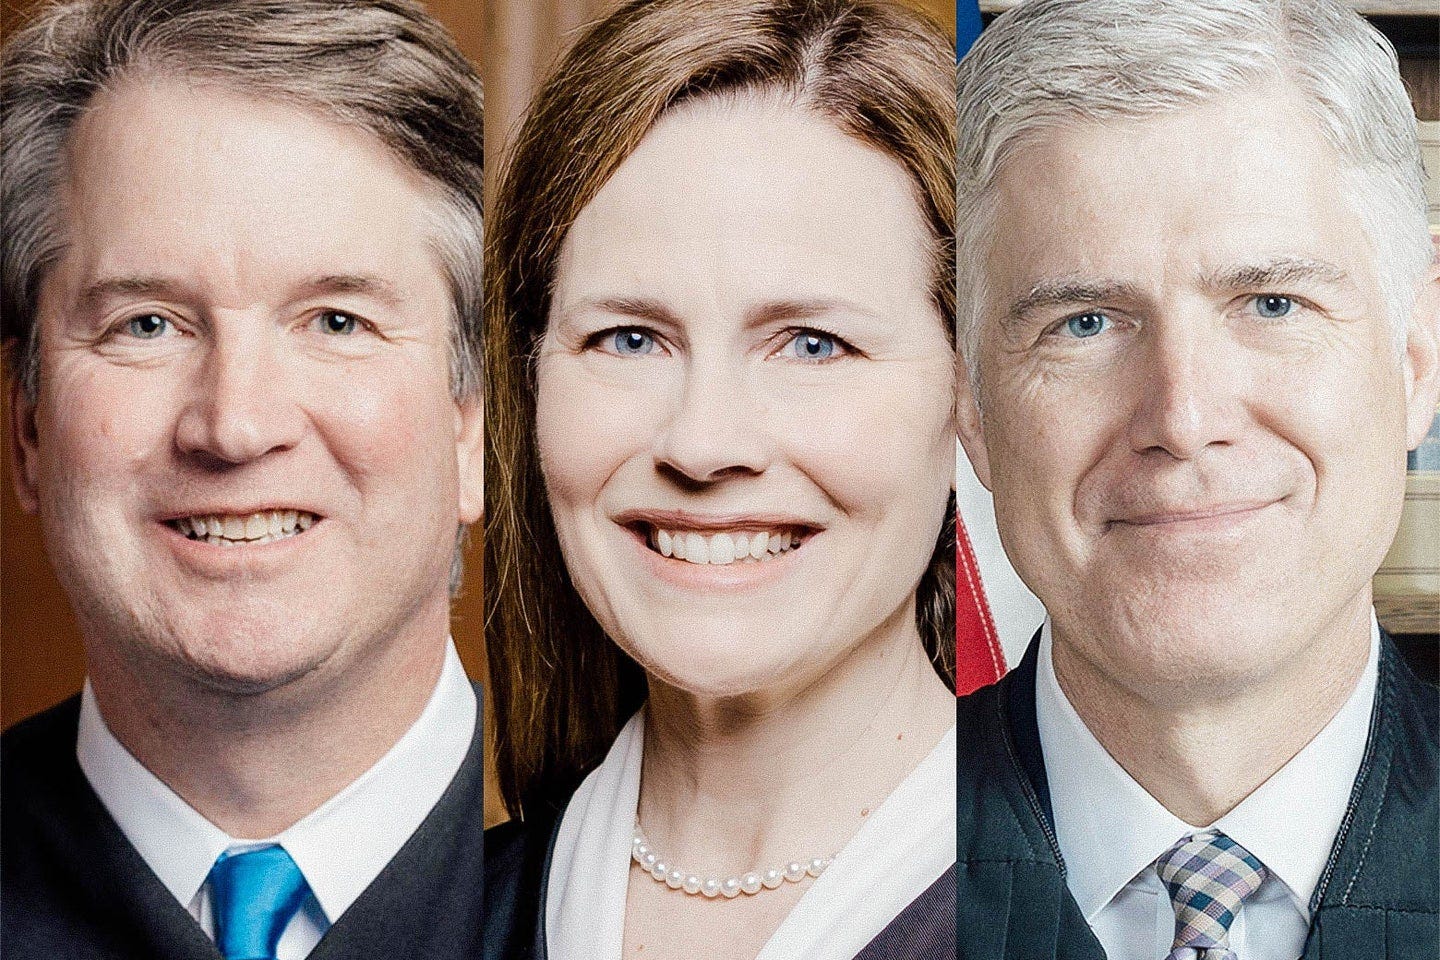 Barrett, Kavanaugh, and Gorsuch will decide the future of Roe.